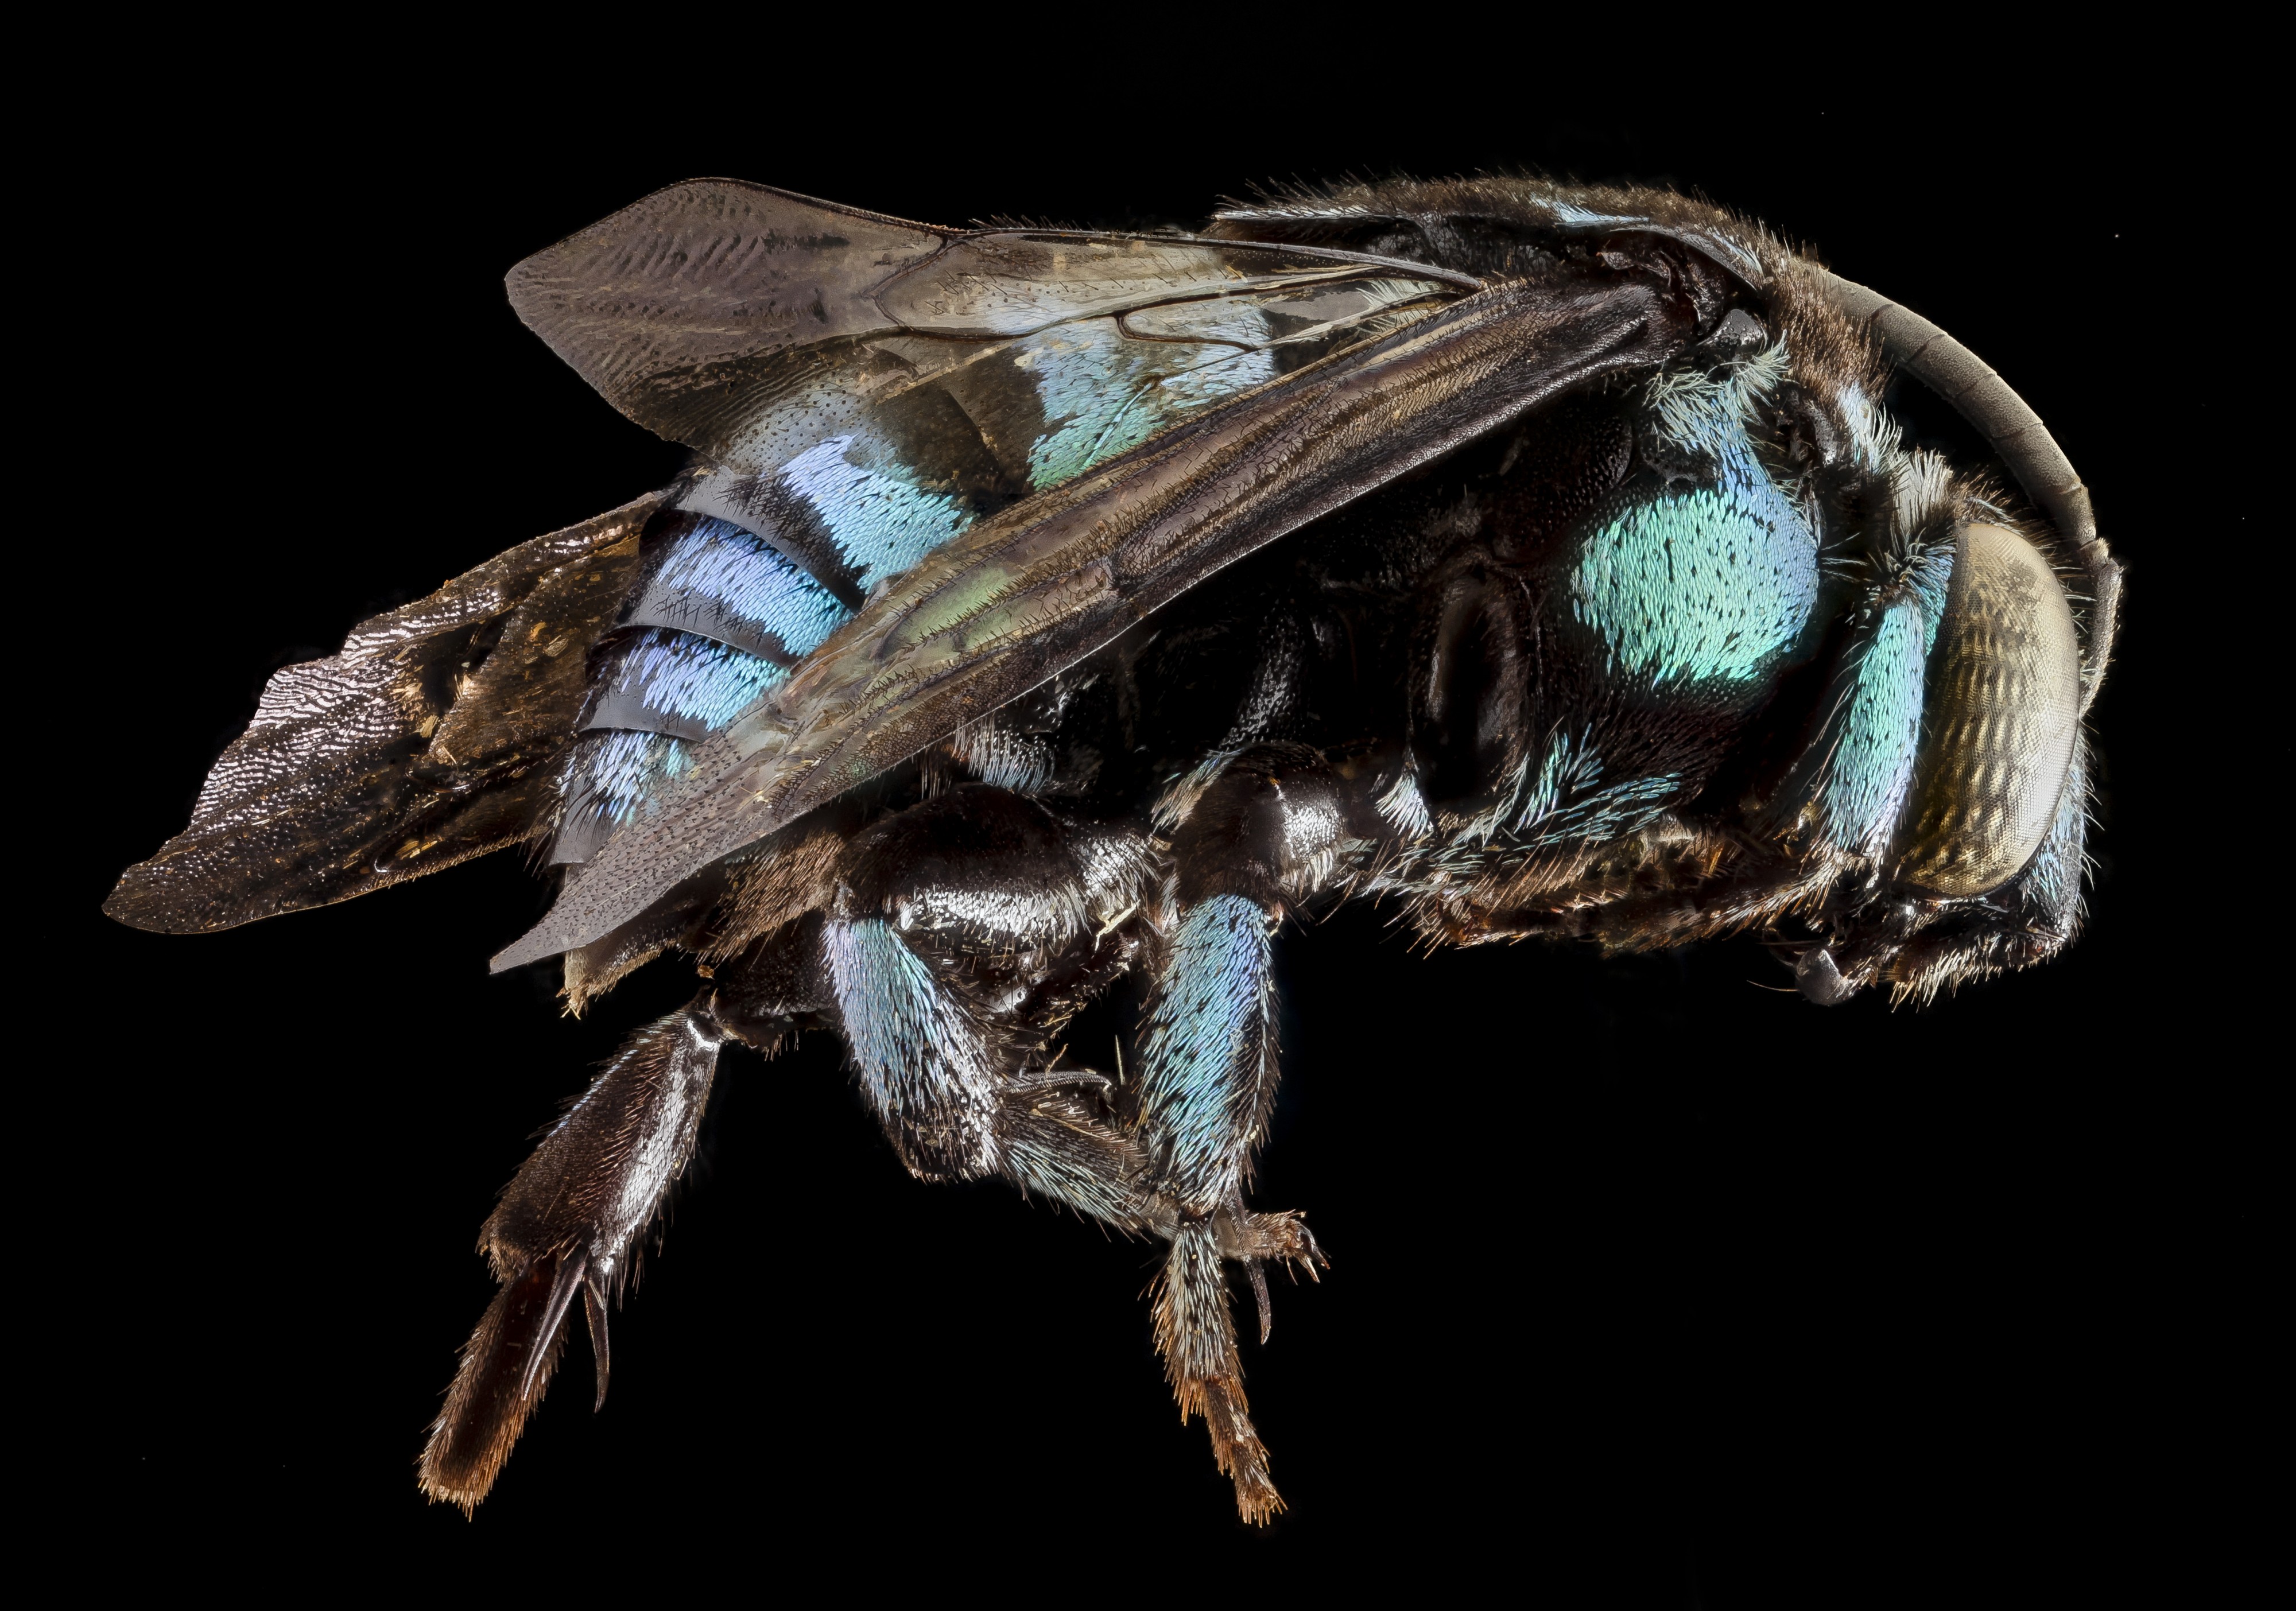 Thyreus wallacei, m, side, philippines, mt banahaw 2014-07-15-19.13.03 ZS PMax